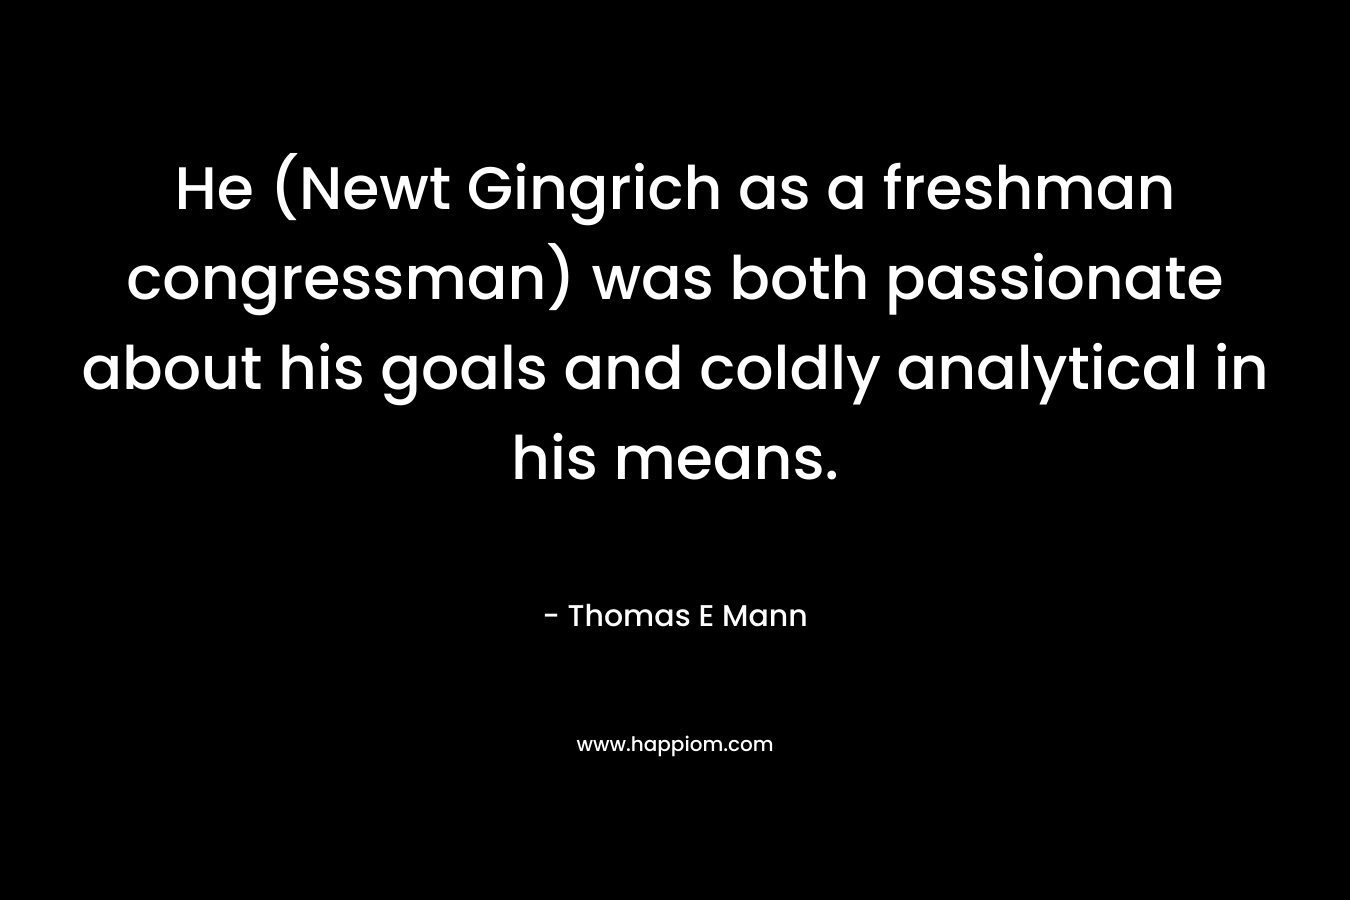 He (Newt Gingrich as a freshman congressman) was both passionate about his goals and coldly analytical in his means.